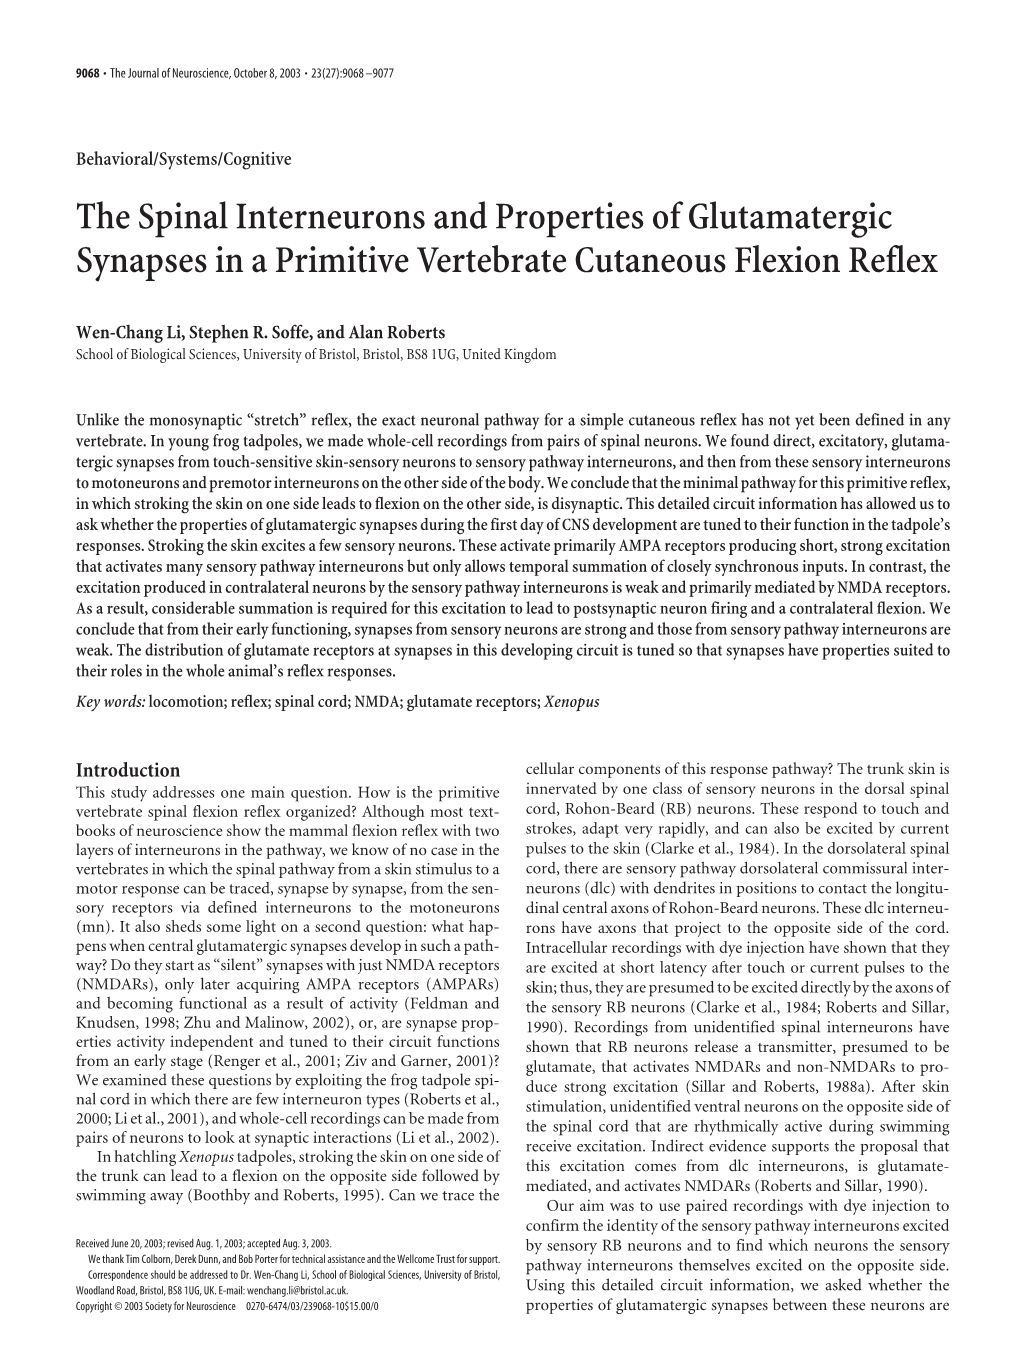 The Spinal Interneurons and Properties of Glutamatergic Synapses in a Primitive Vertebrate Cutaneous Flexion Reflex